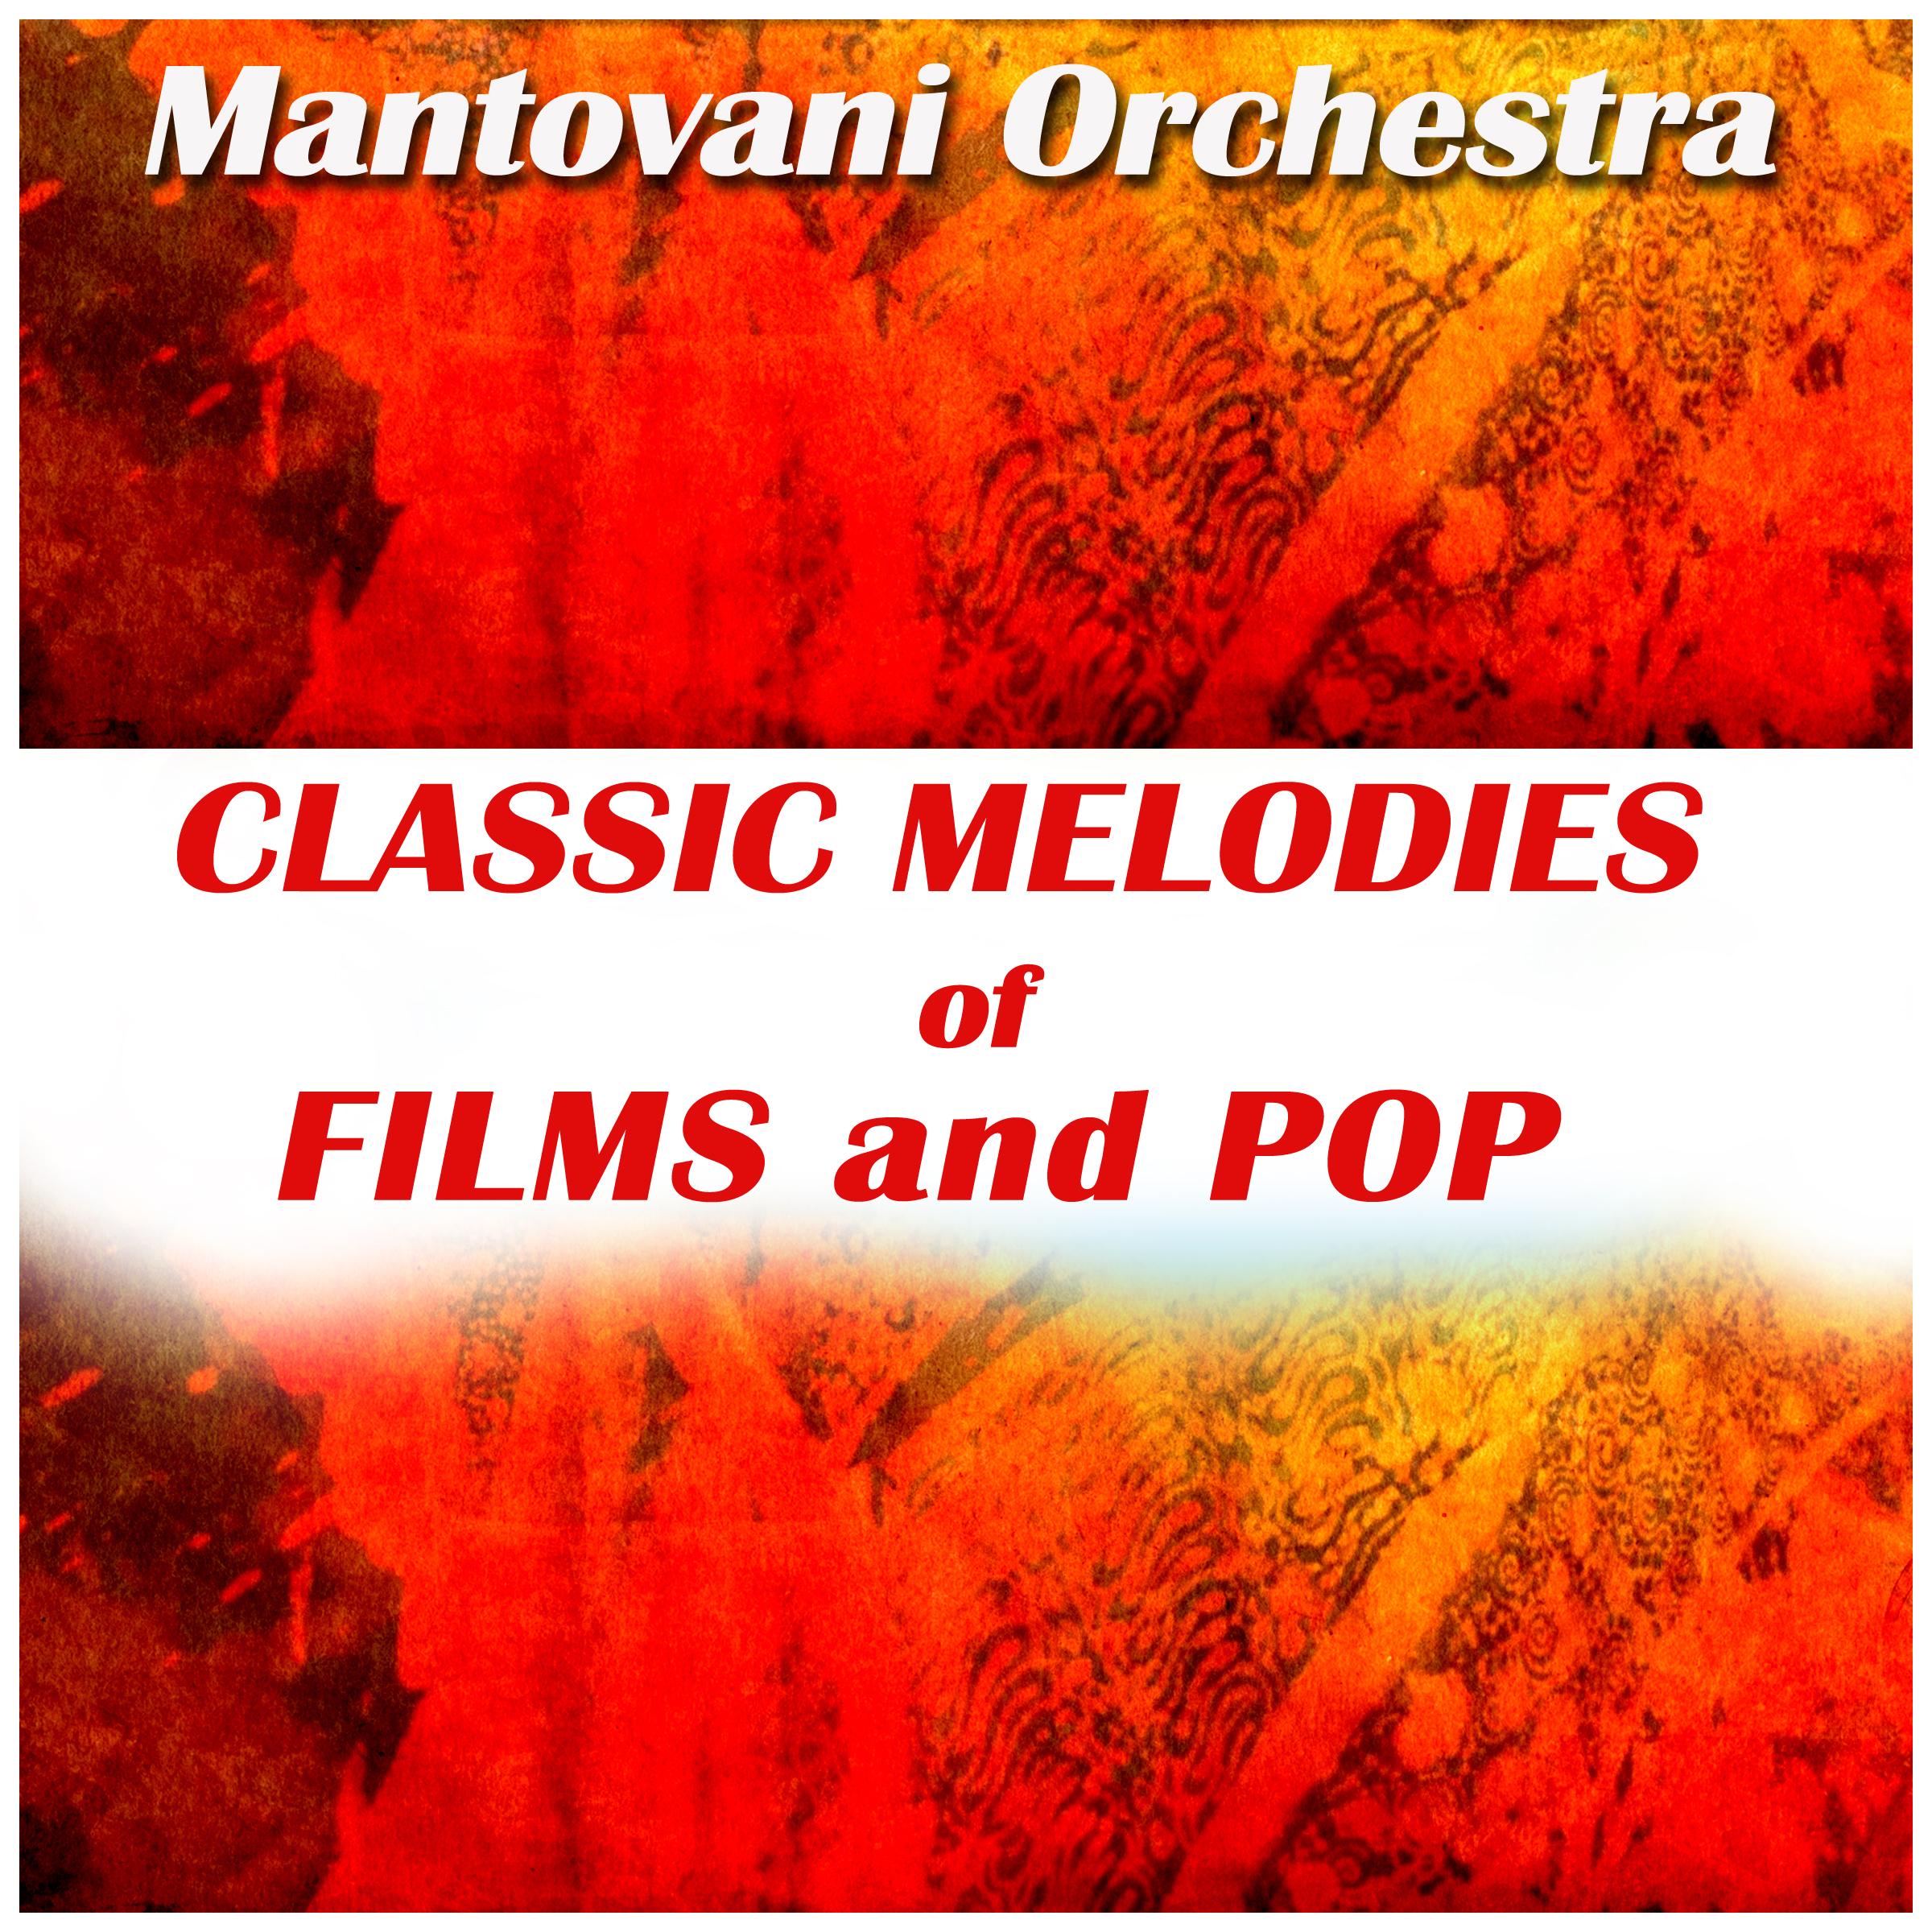 Mantovani Orchestra - Classic Melodies of Films and Pop